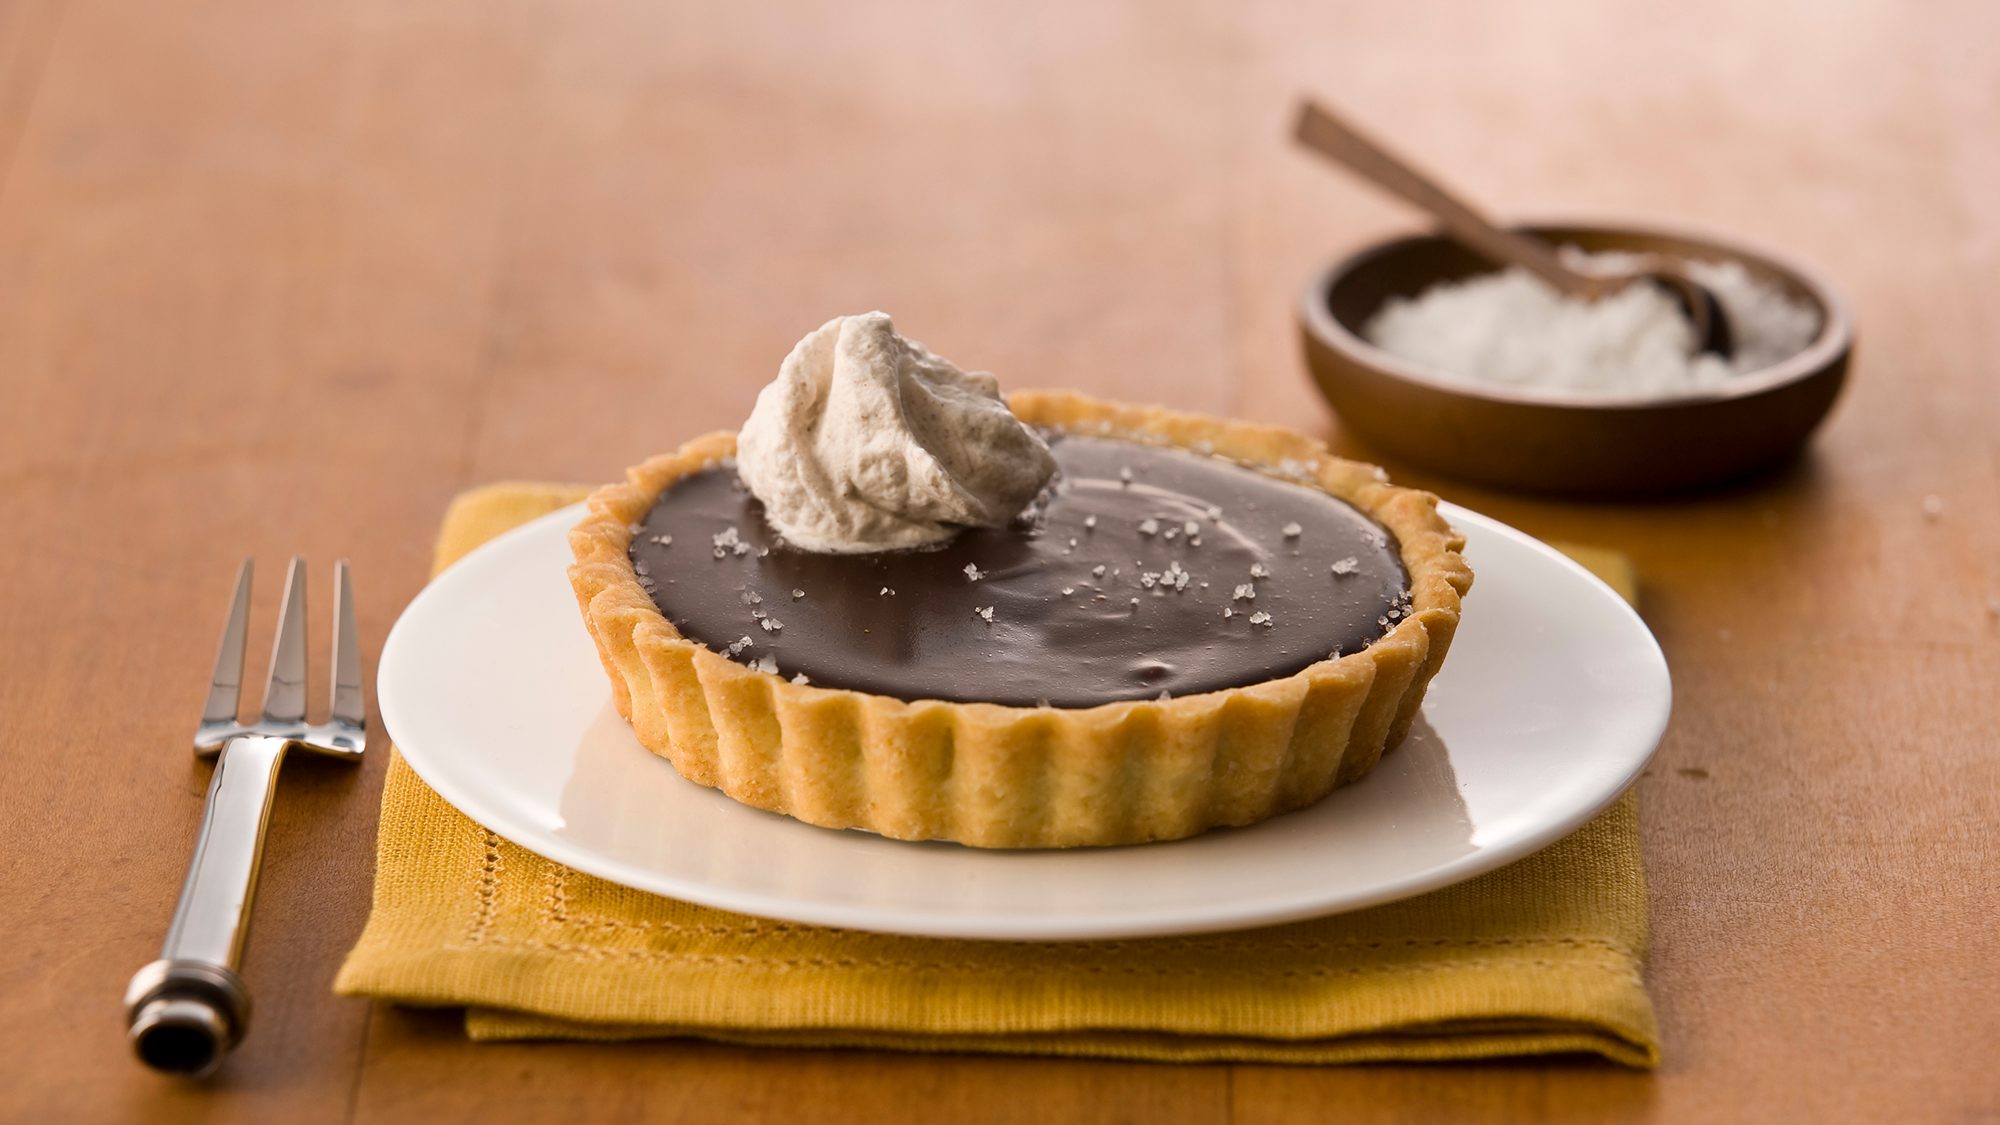 chocolate-tart-with-salted-caramel-and-spiced-chantilly-cream.jpg